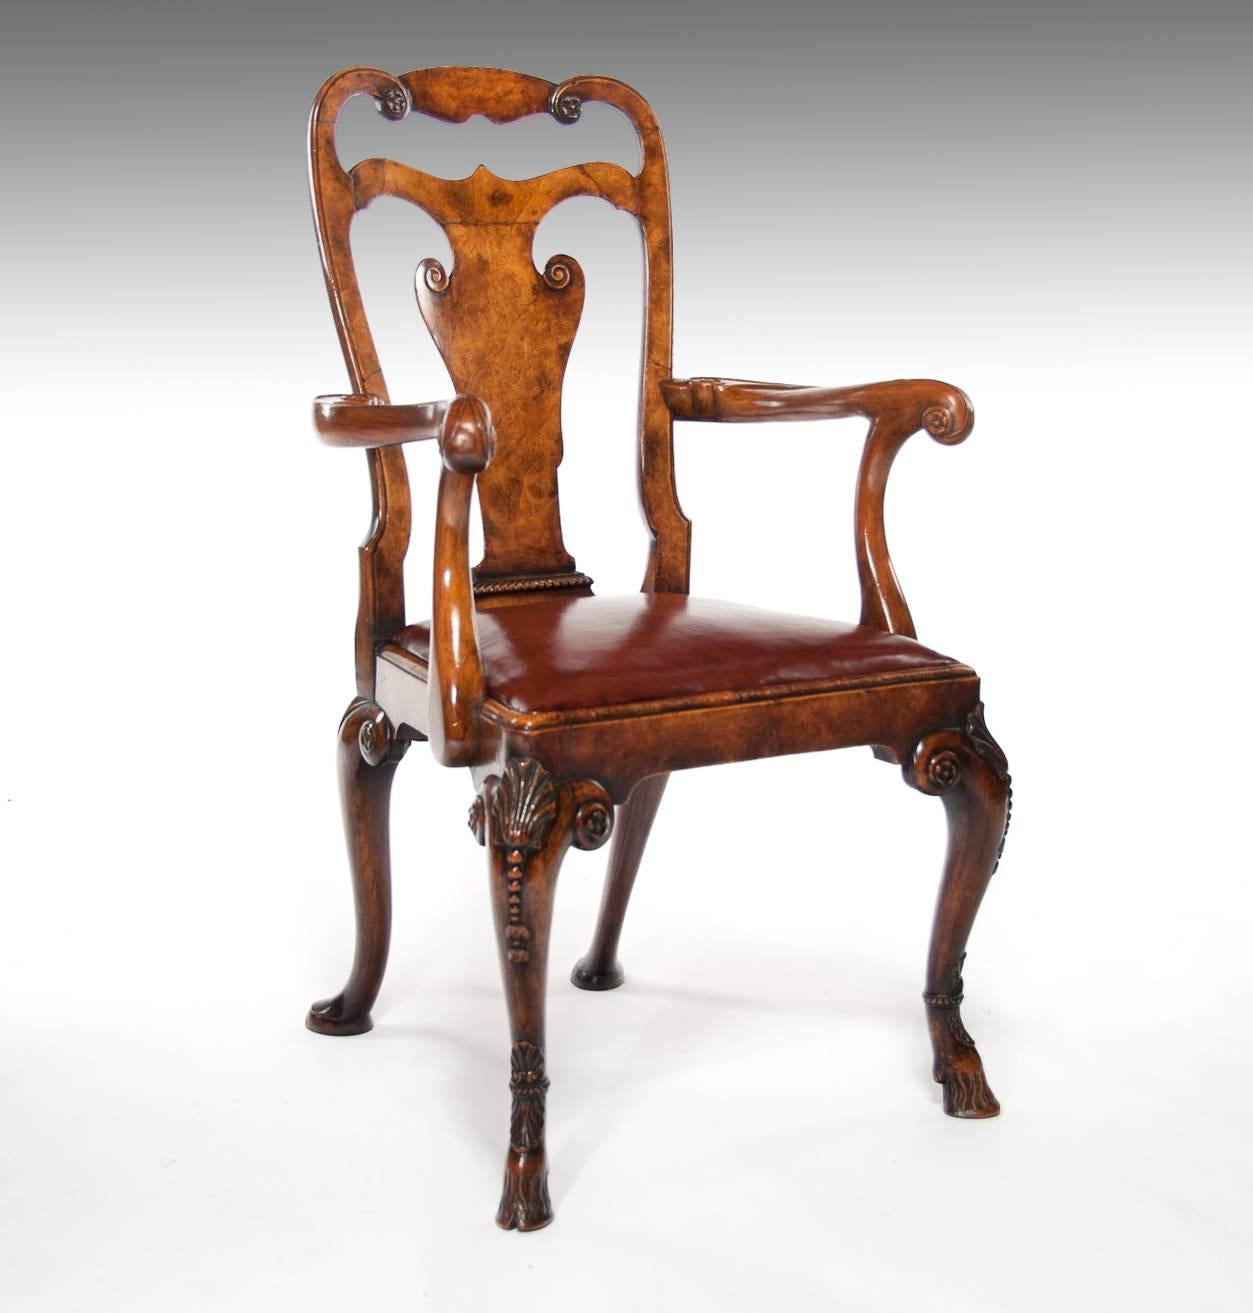 A superb quality antique walnut and leather desk chair, circa 1900-1920 by W Charles Tozer, 25 Brook Street, London W1 who were one of the finest cabinetmakers specializing in the early Georgian / Queen Anne walnut revival furniture.
Having a